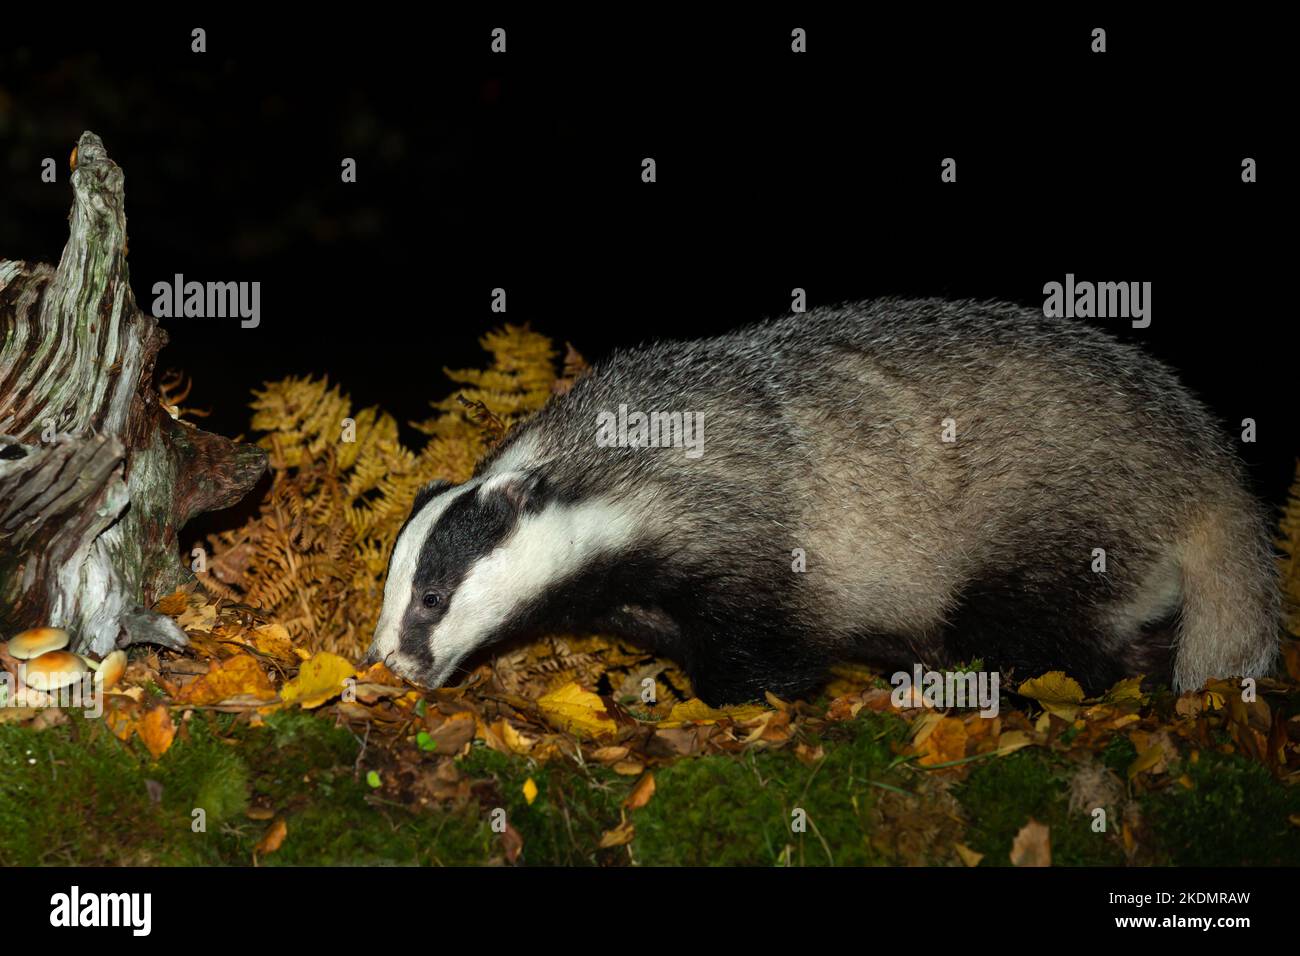 Badger, Scientific name: Meles Meles, foraging in golden Autumn leaves and facing left.  Night time image.  Full length close up of an adult badger in Stock Photo